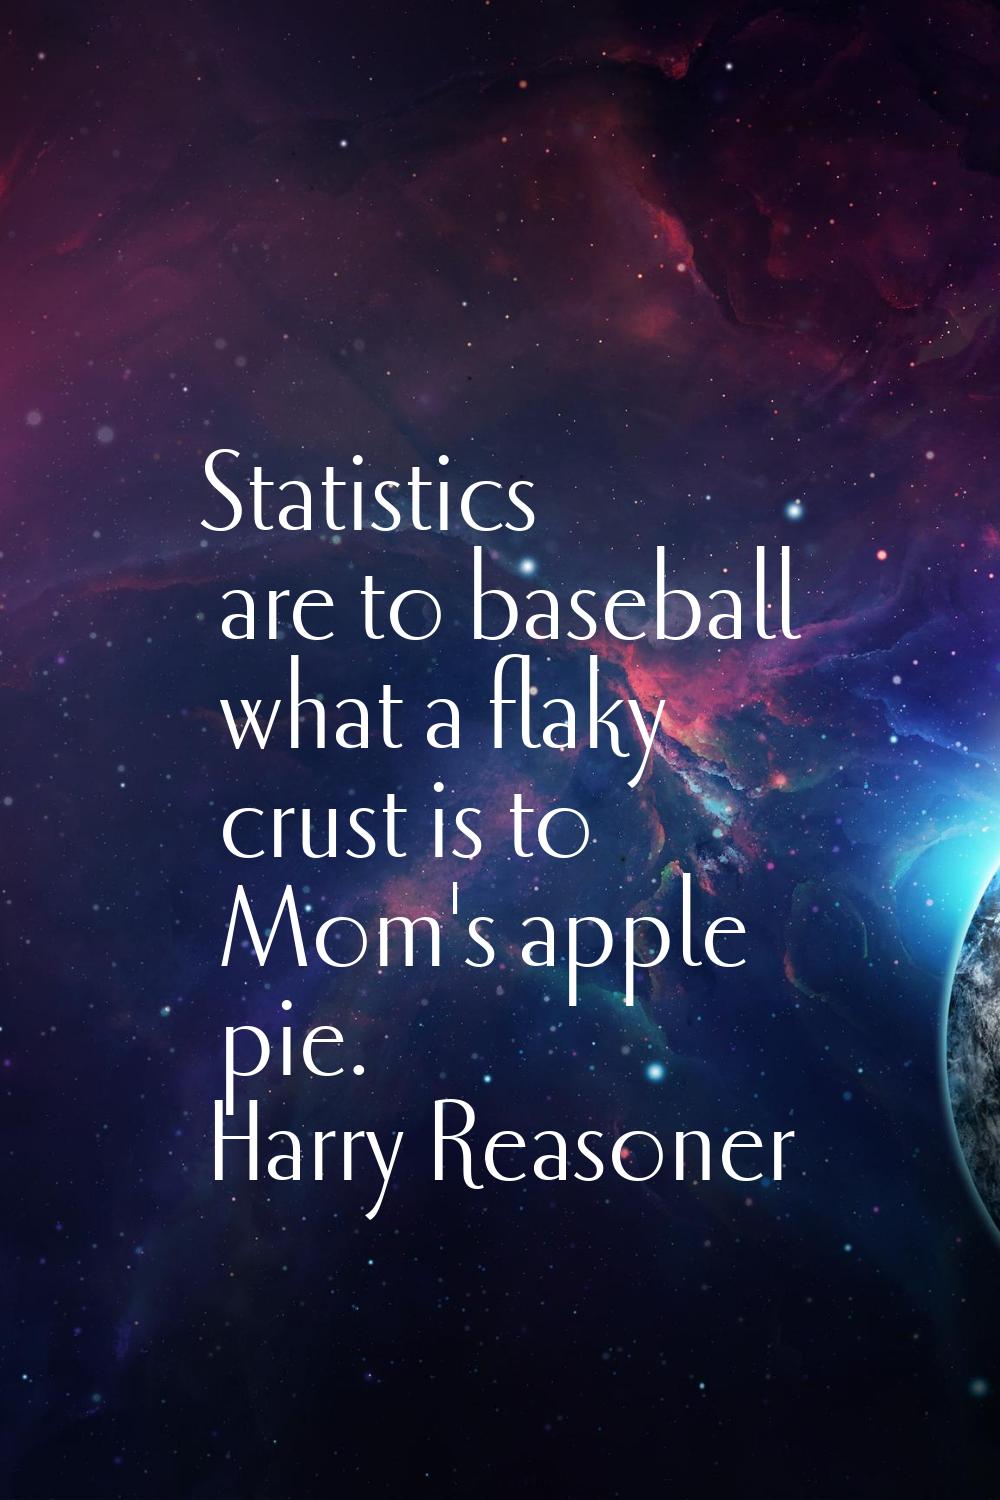 Statistics are to baseball what a flaky crust is to Mom's apple pie.